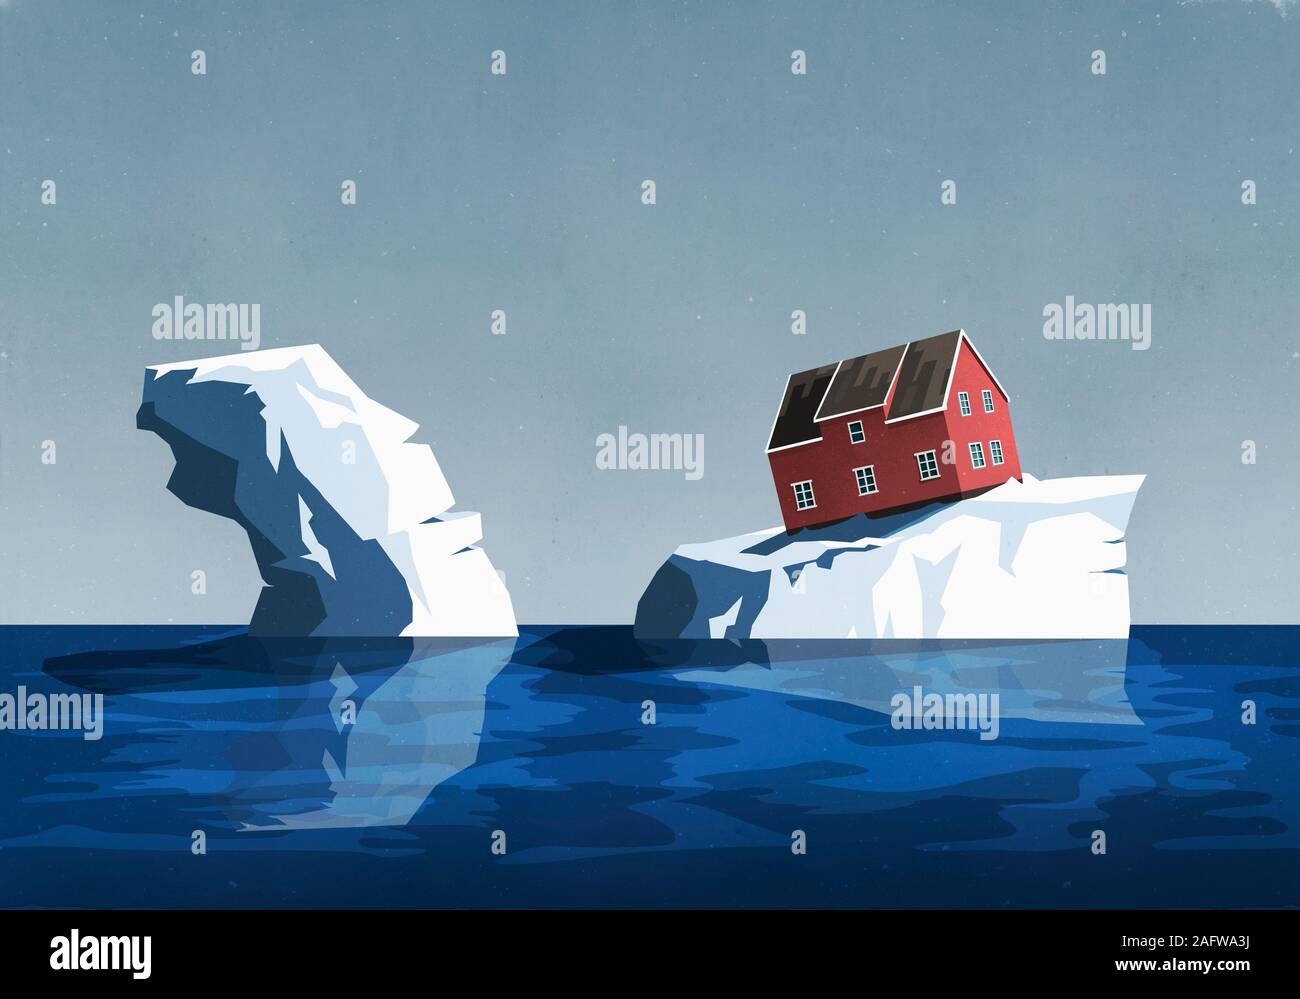 House perched precariously on iceberg Stock Photo